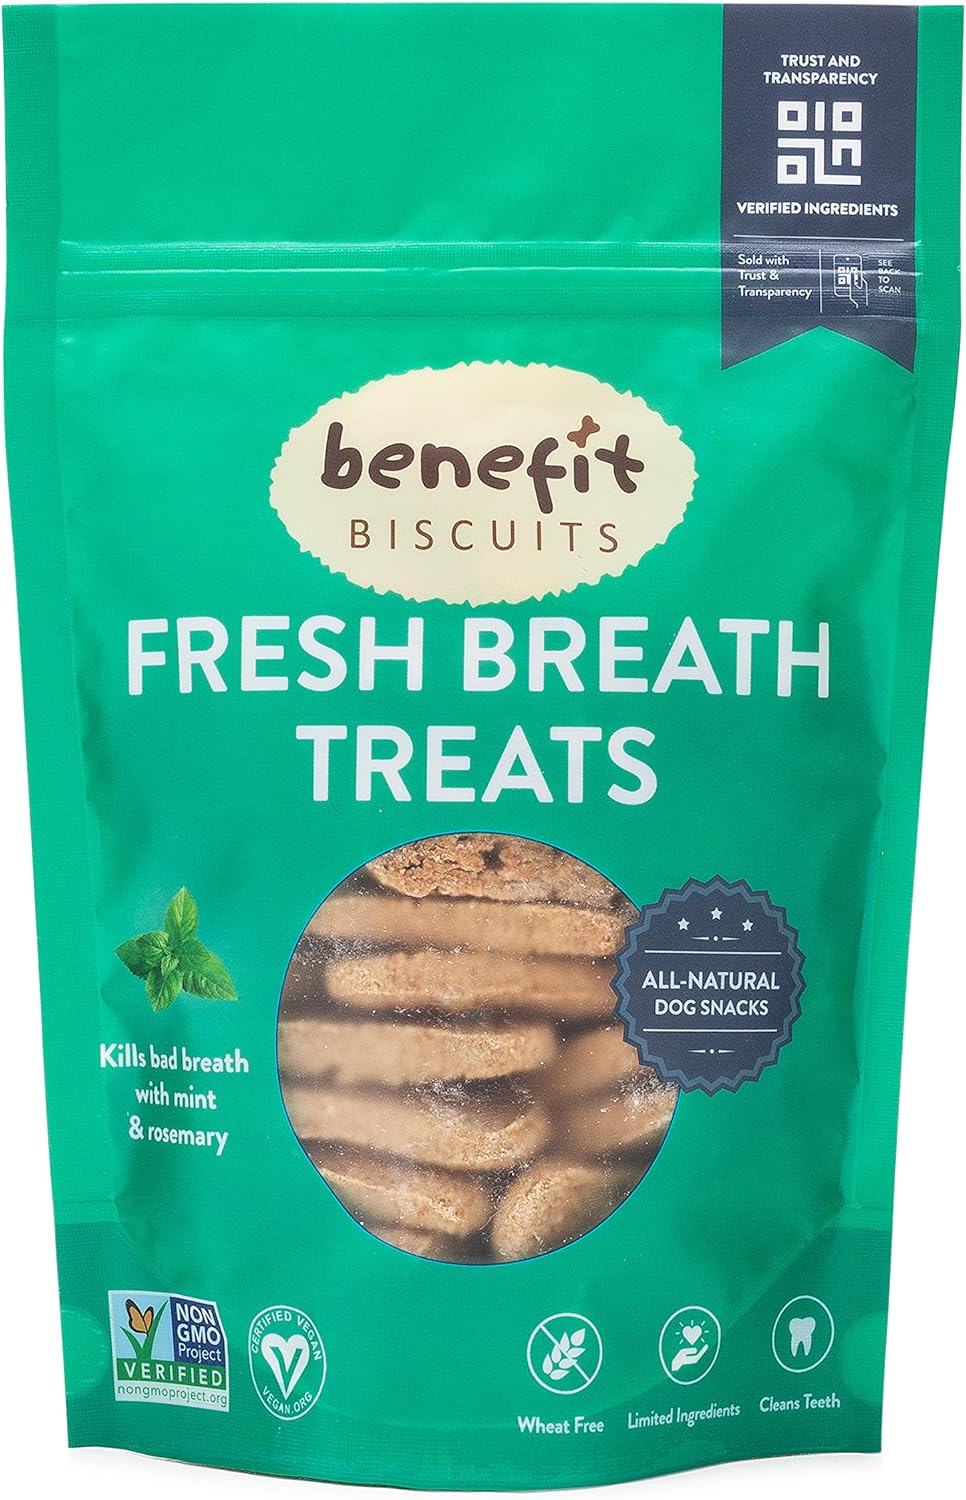 Benefit Biscuits, All Natural Dog Treats, Certified Vegan, Non GMO, Wheat Free, Healthy Dog Biscuits, Made in USA (Mint, Regular Bag, 7oz)